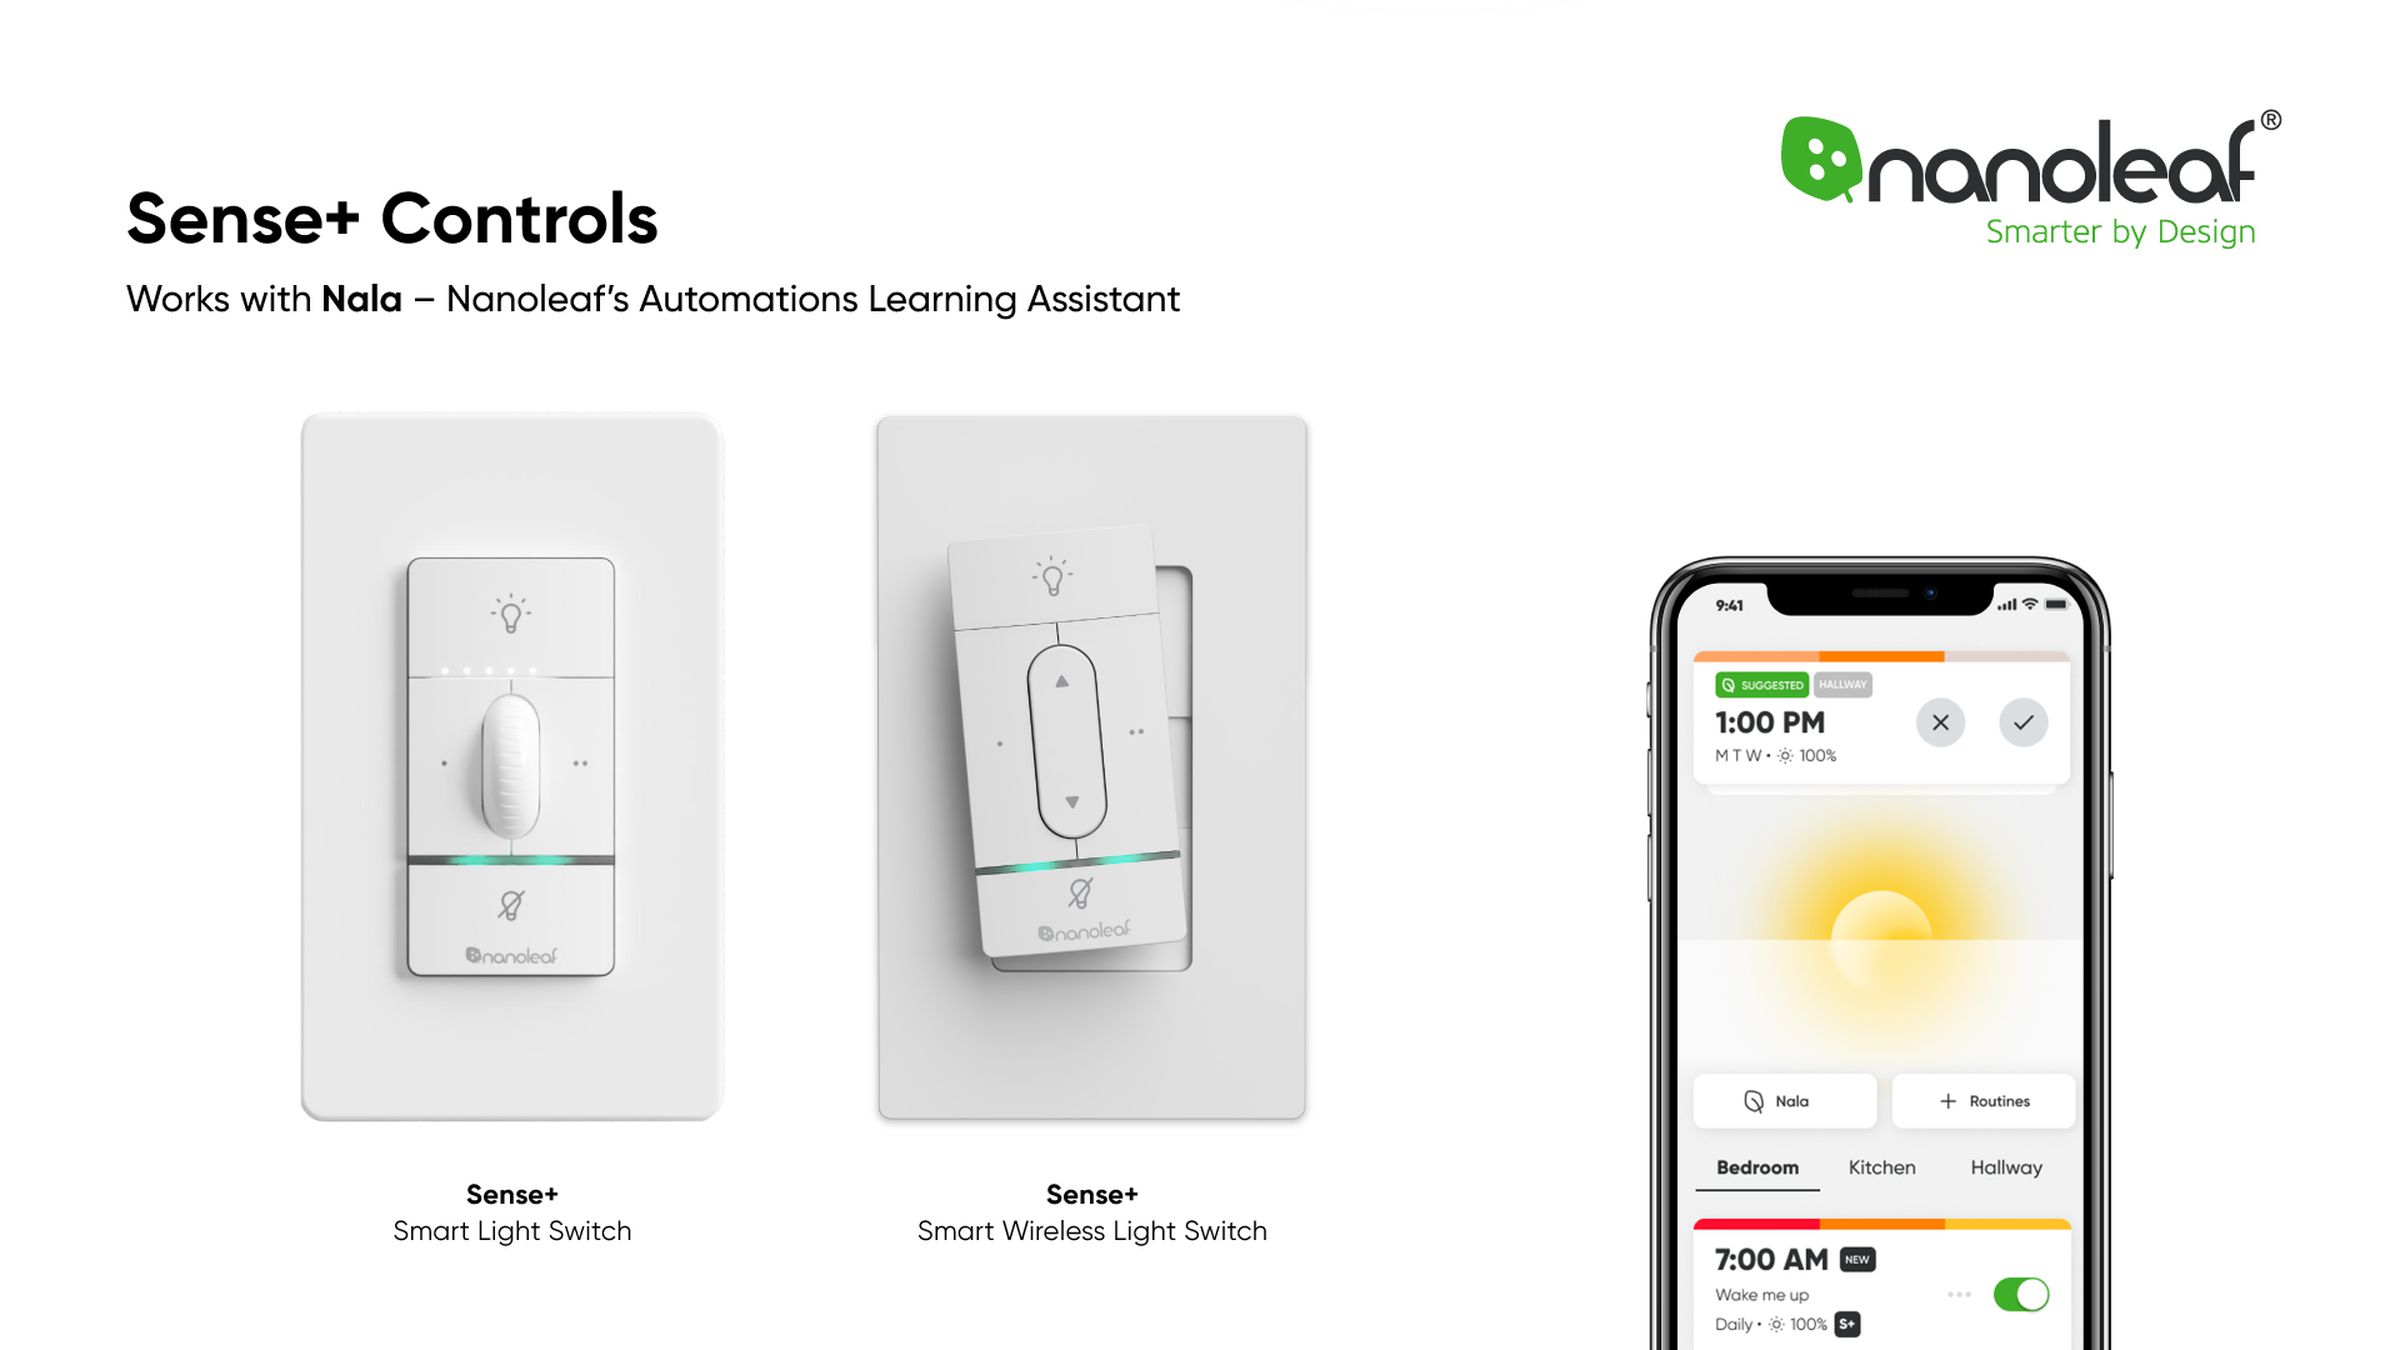 The Nanoleaf Sense Plus smart switches have four buttons and a dimmer control.